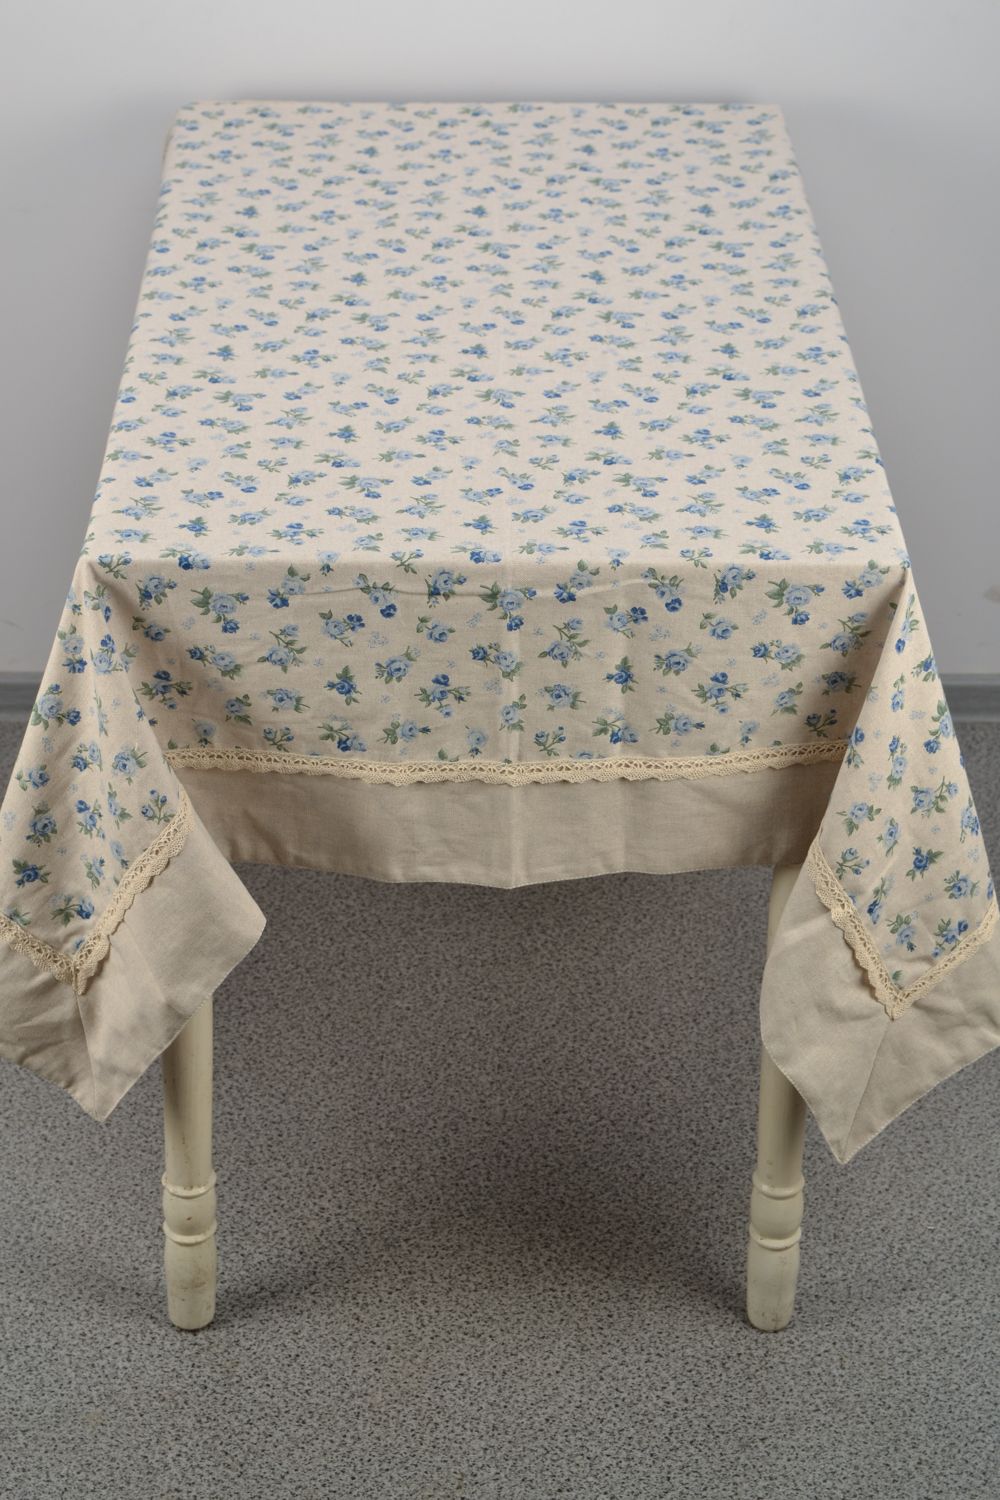 Handmade cotton and polyamide tablecloth with floral print and lace photo 2